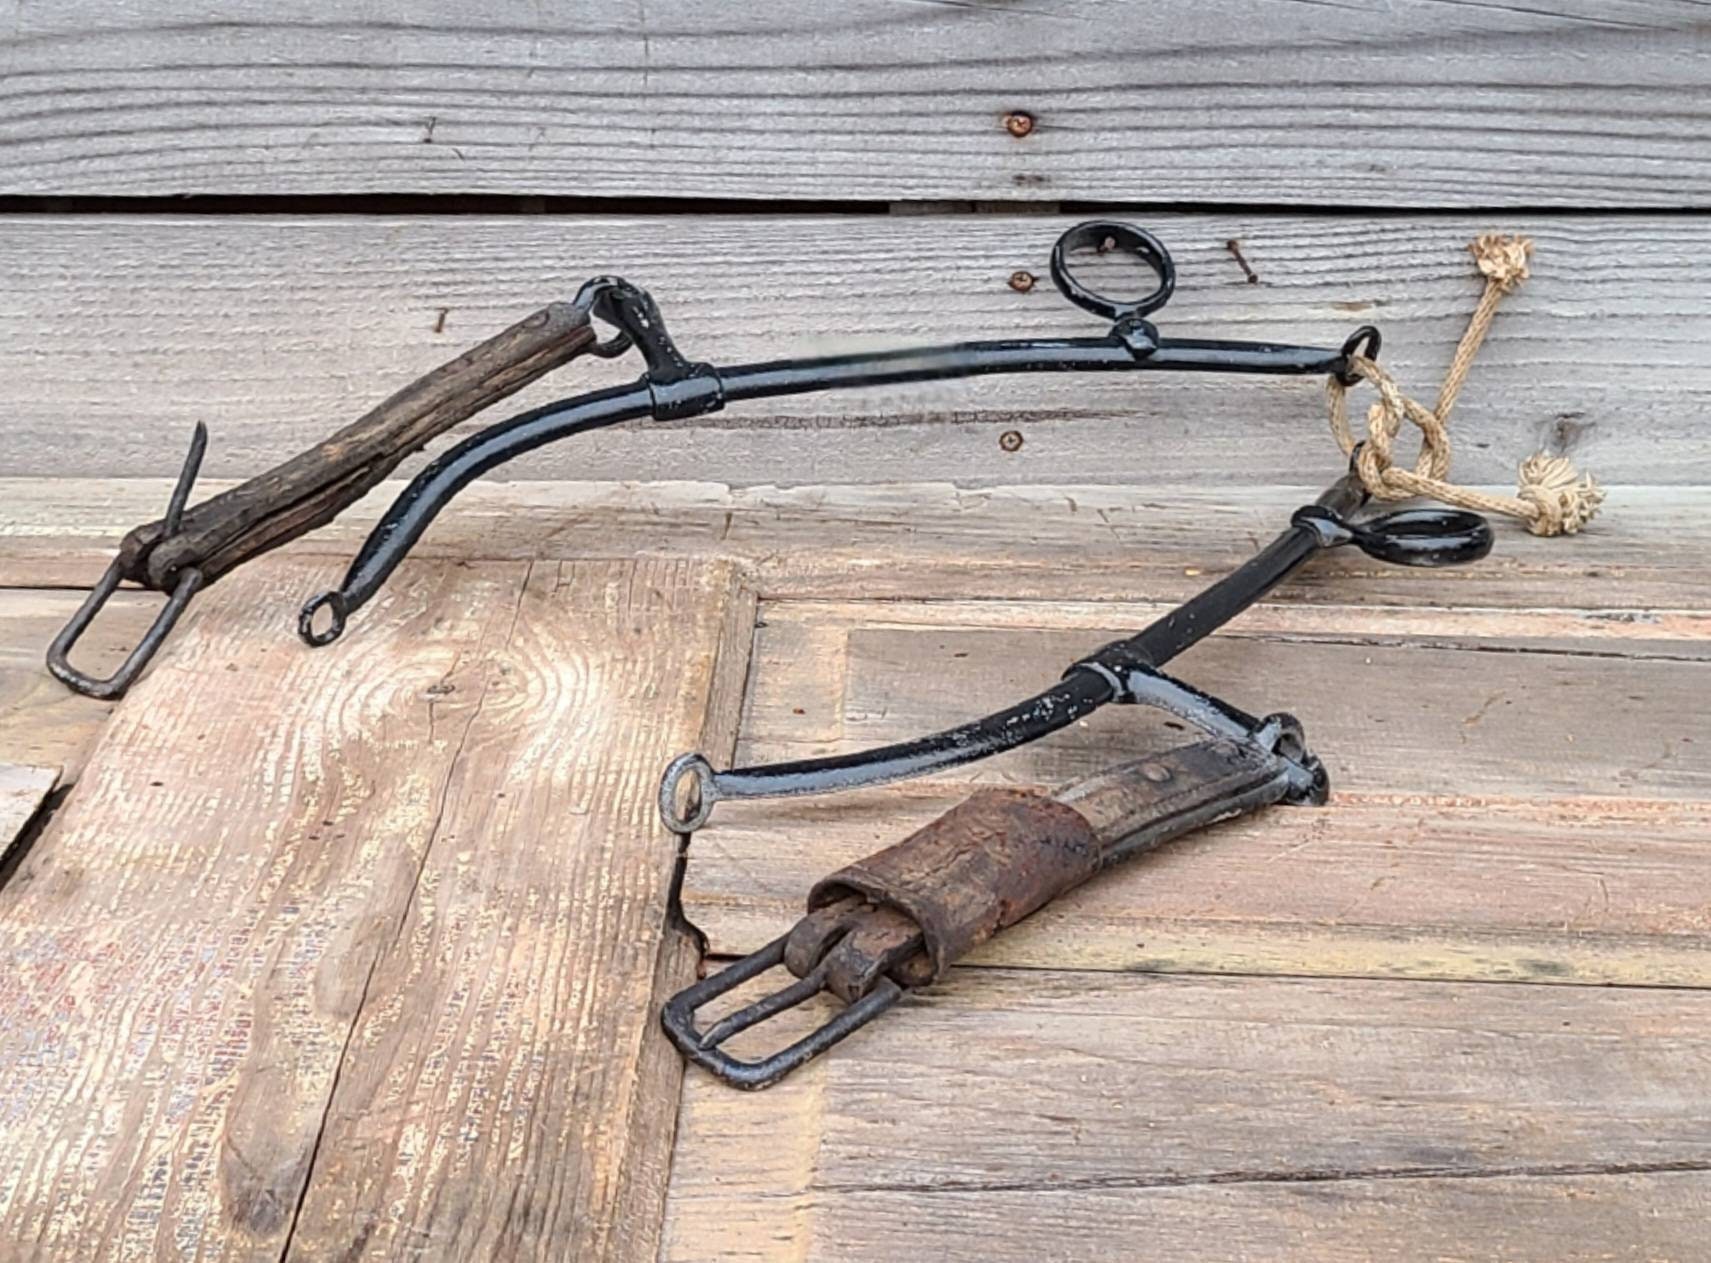 Small Vintage-Style Cast Iron Harness Hook | Marmalade Mercantile